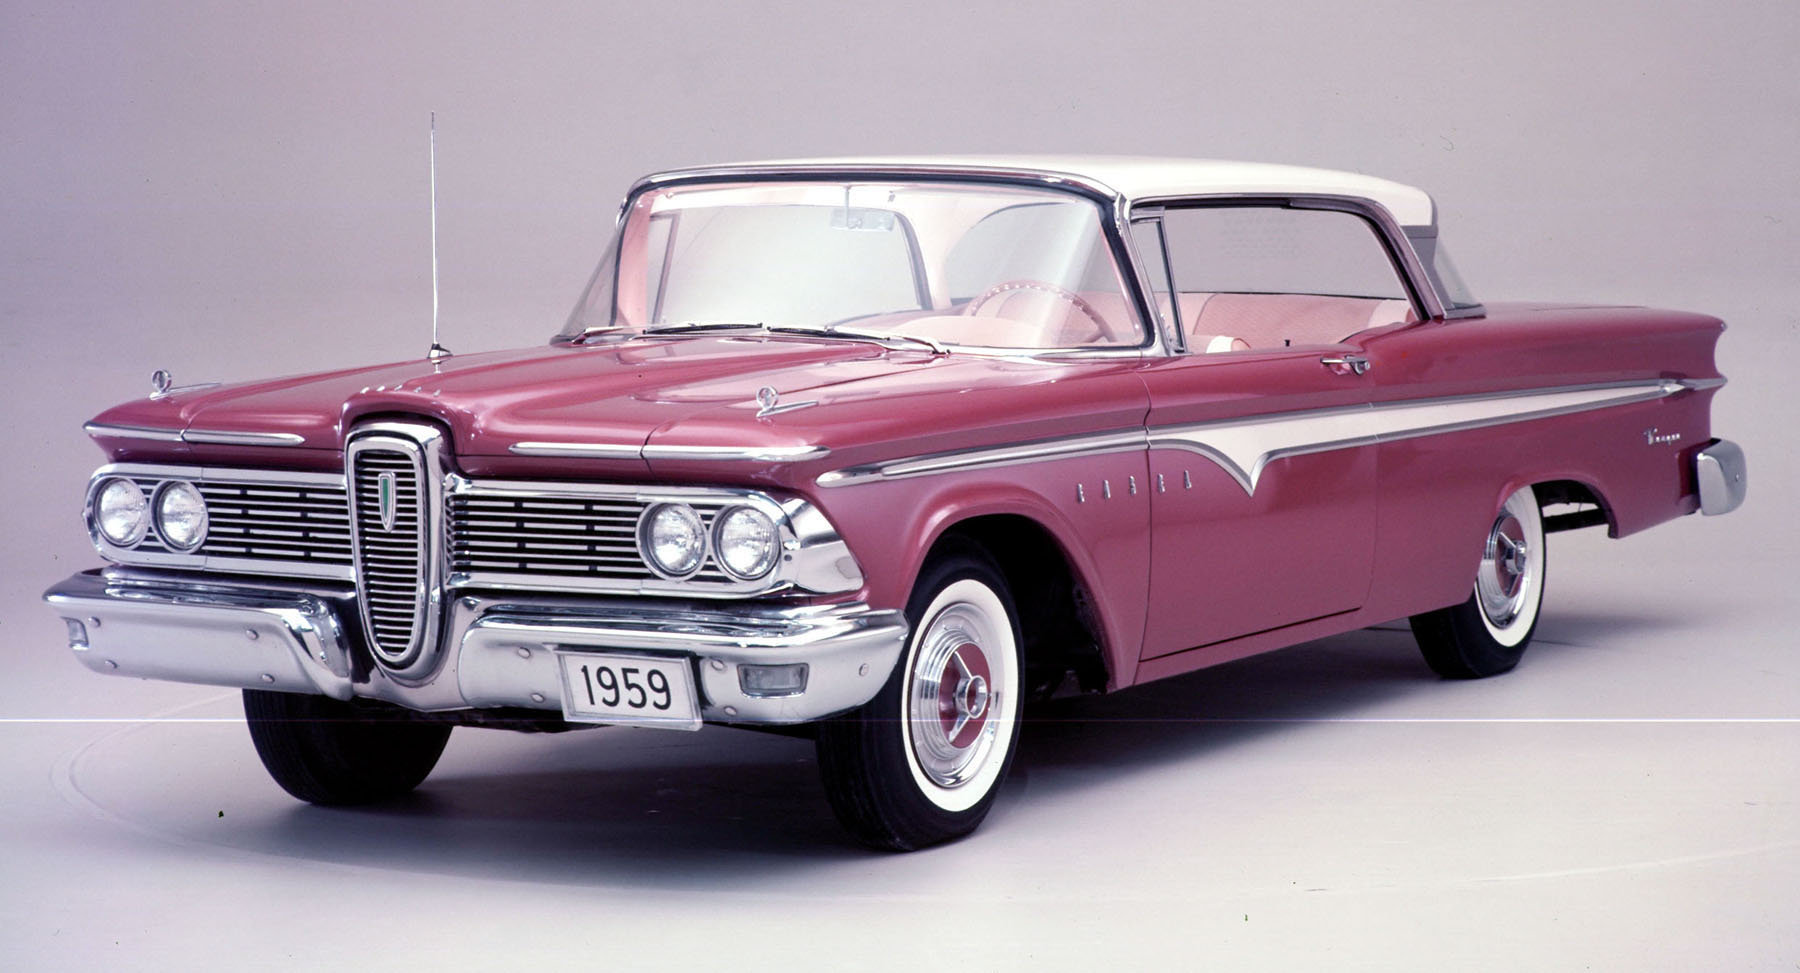   http://www.tomorrowstarted.com/wp-content/uploads/2012/02/ford-edsel.jpg    